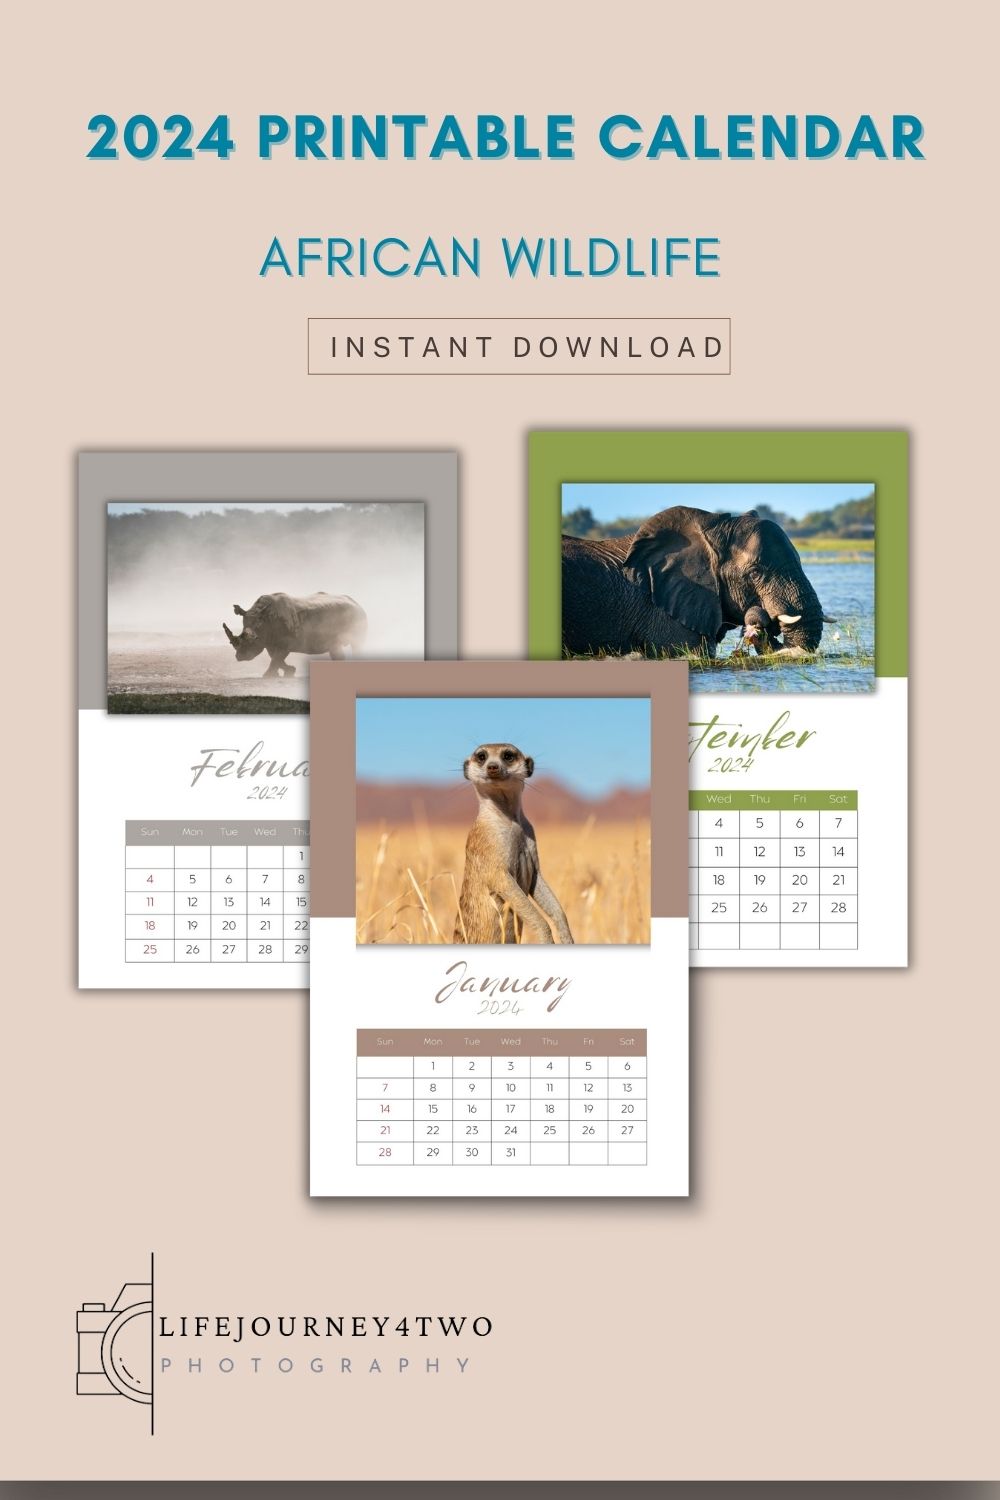 2024 Printable Calendar with three month pages shown - one with a meerkat, another and elephant in water and the third a rhino in dust